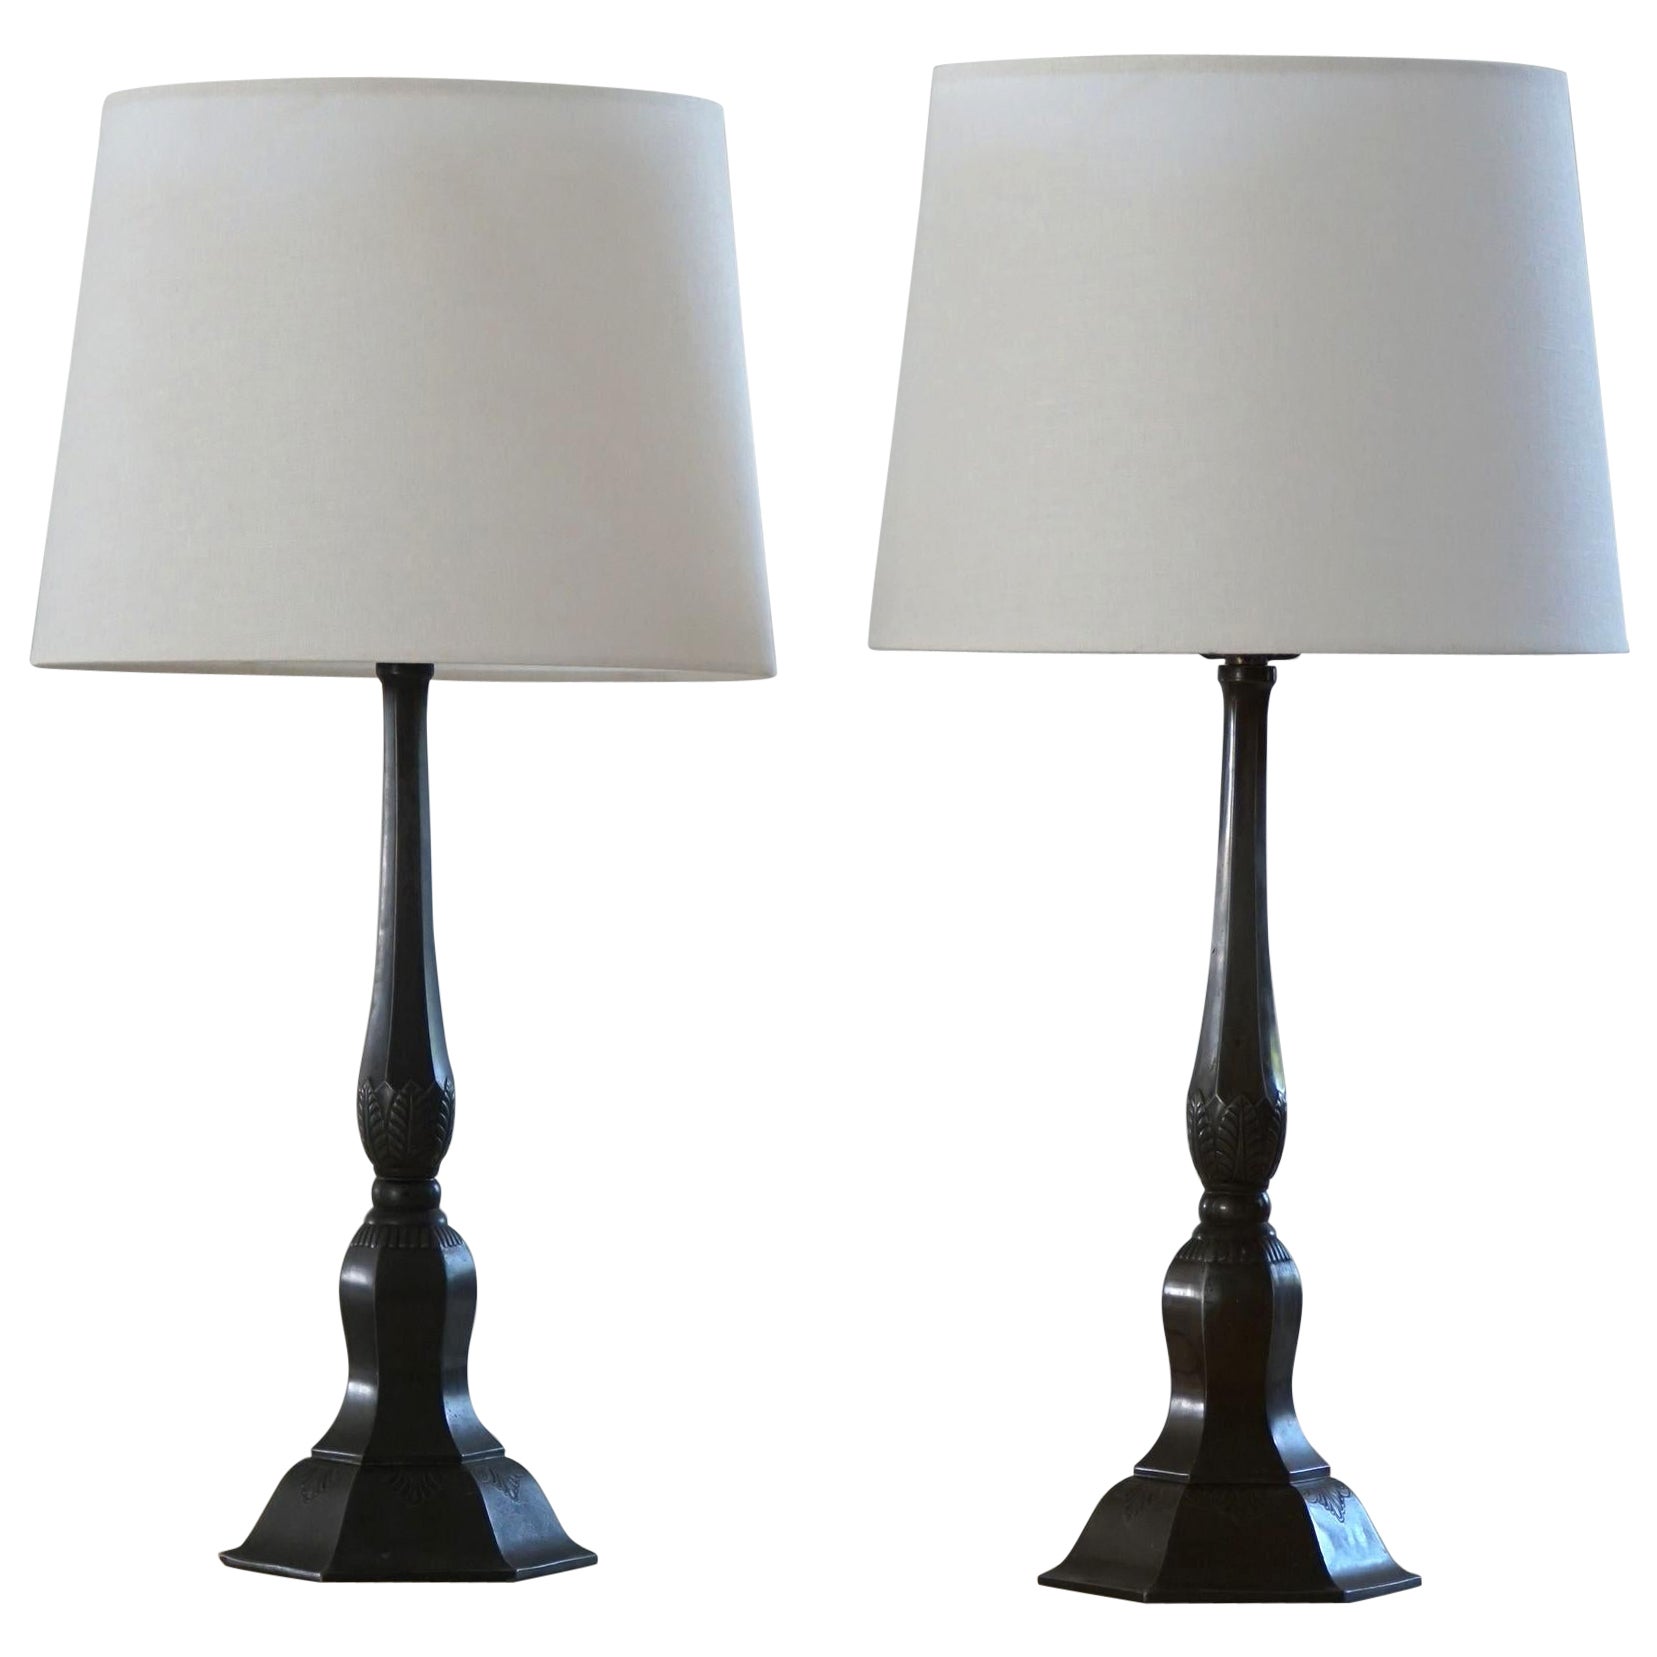 A Pair of Danish Modern Table Lamps from Just Andersen in Diskometal, 1920s